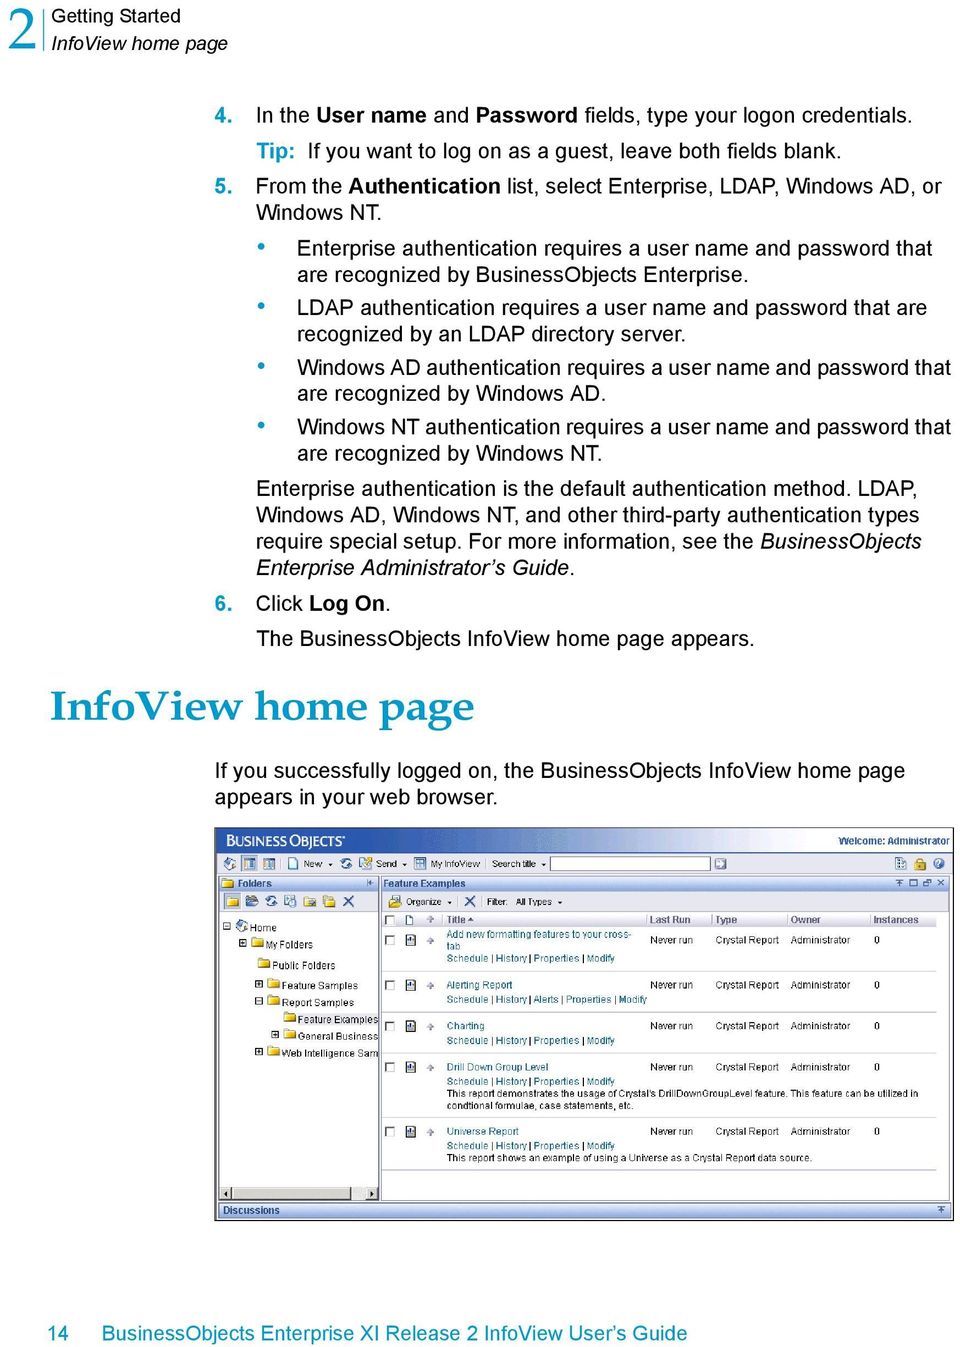 LDAP authentication requires a user name and password that are recognized by an LDAP directory server. Windows AD authentication requires a user name and password that are recognized by Windows AD.